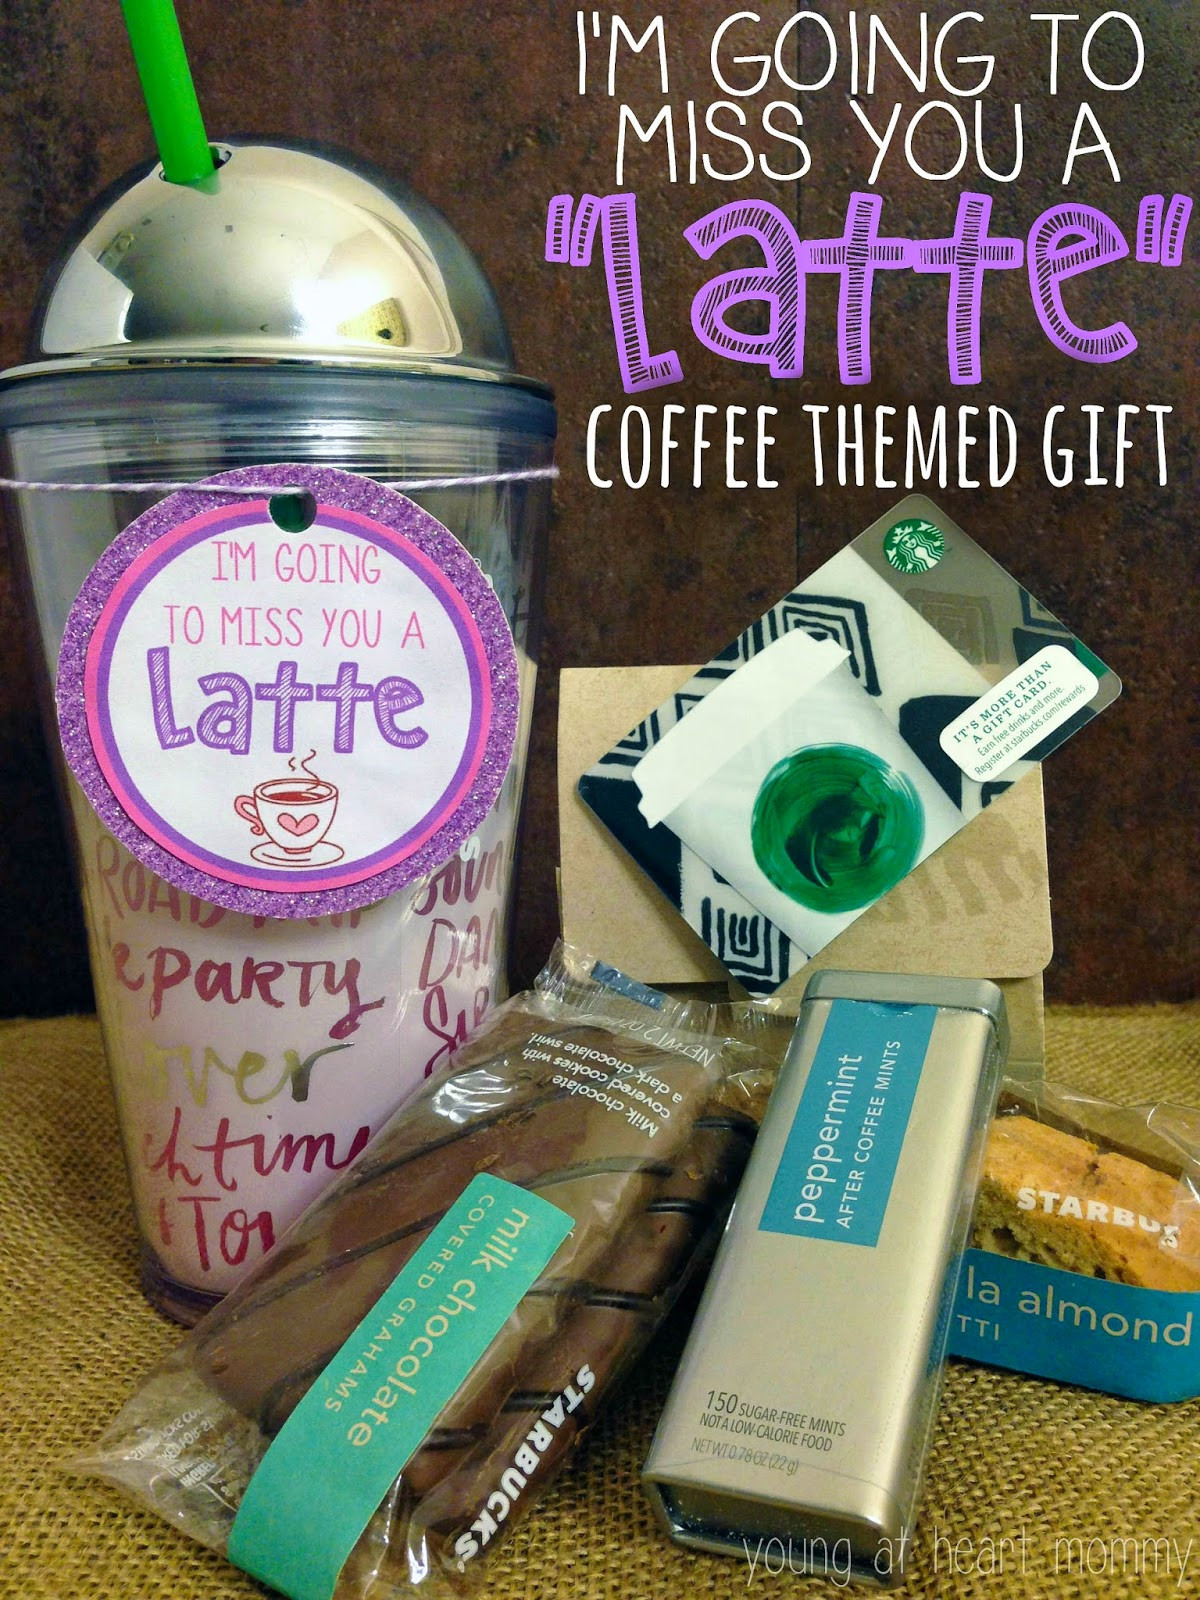 Going Away Gift Ideas For Girlfriend
 Young At Heart Mommy I m Going To Miss You A "LATTE